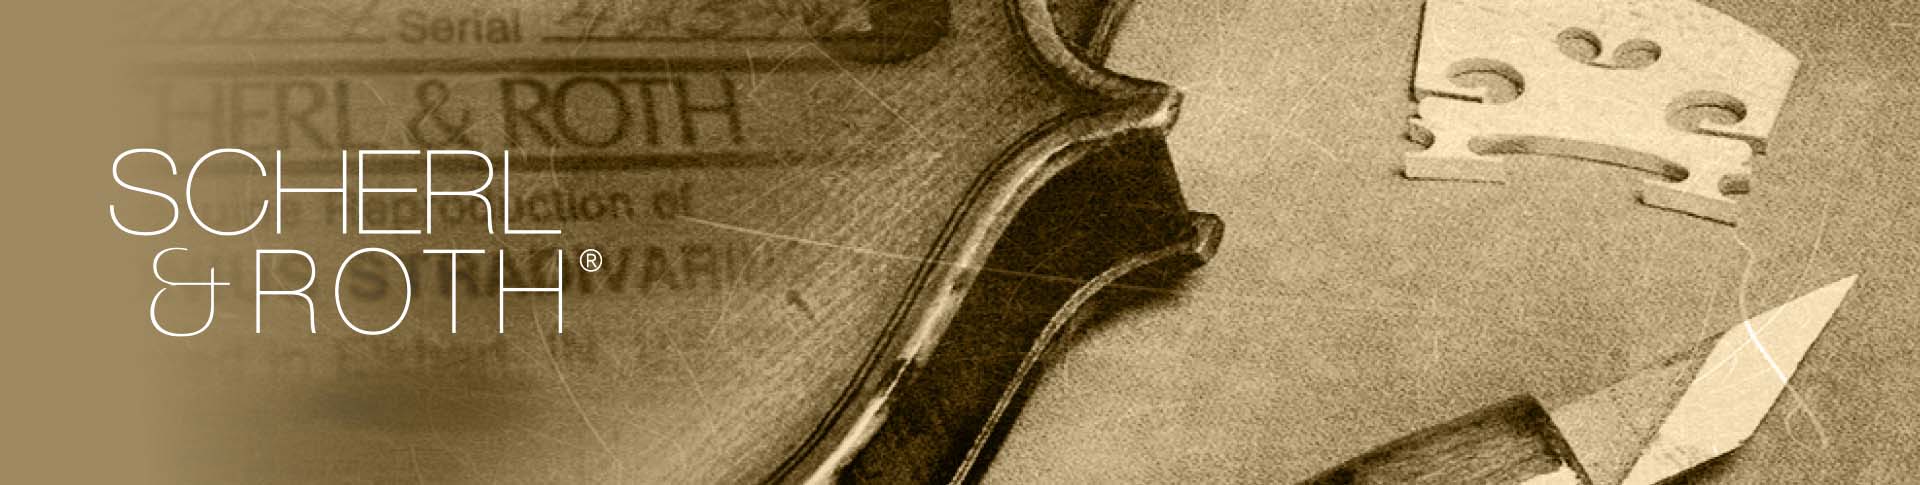 Scherl and Roth logo on top of violin pieces